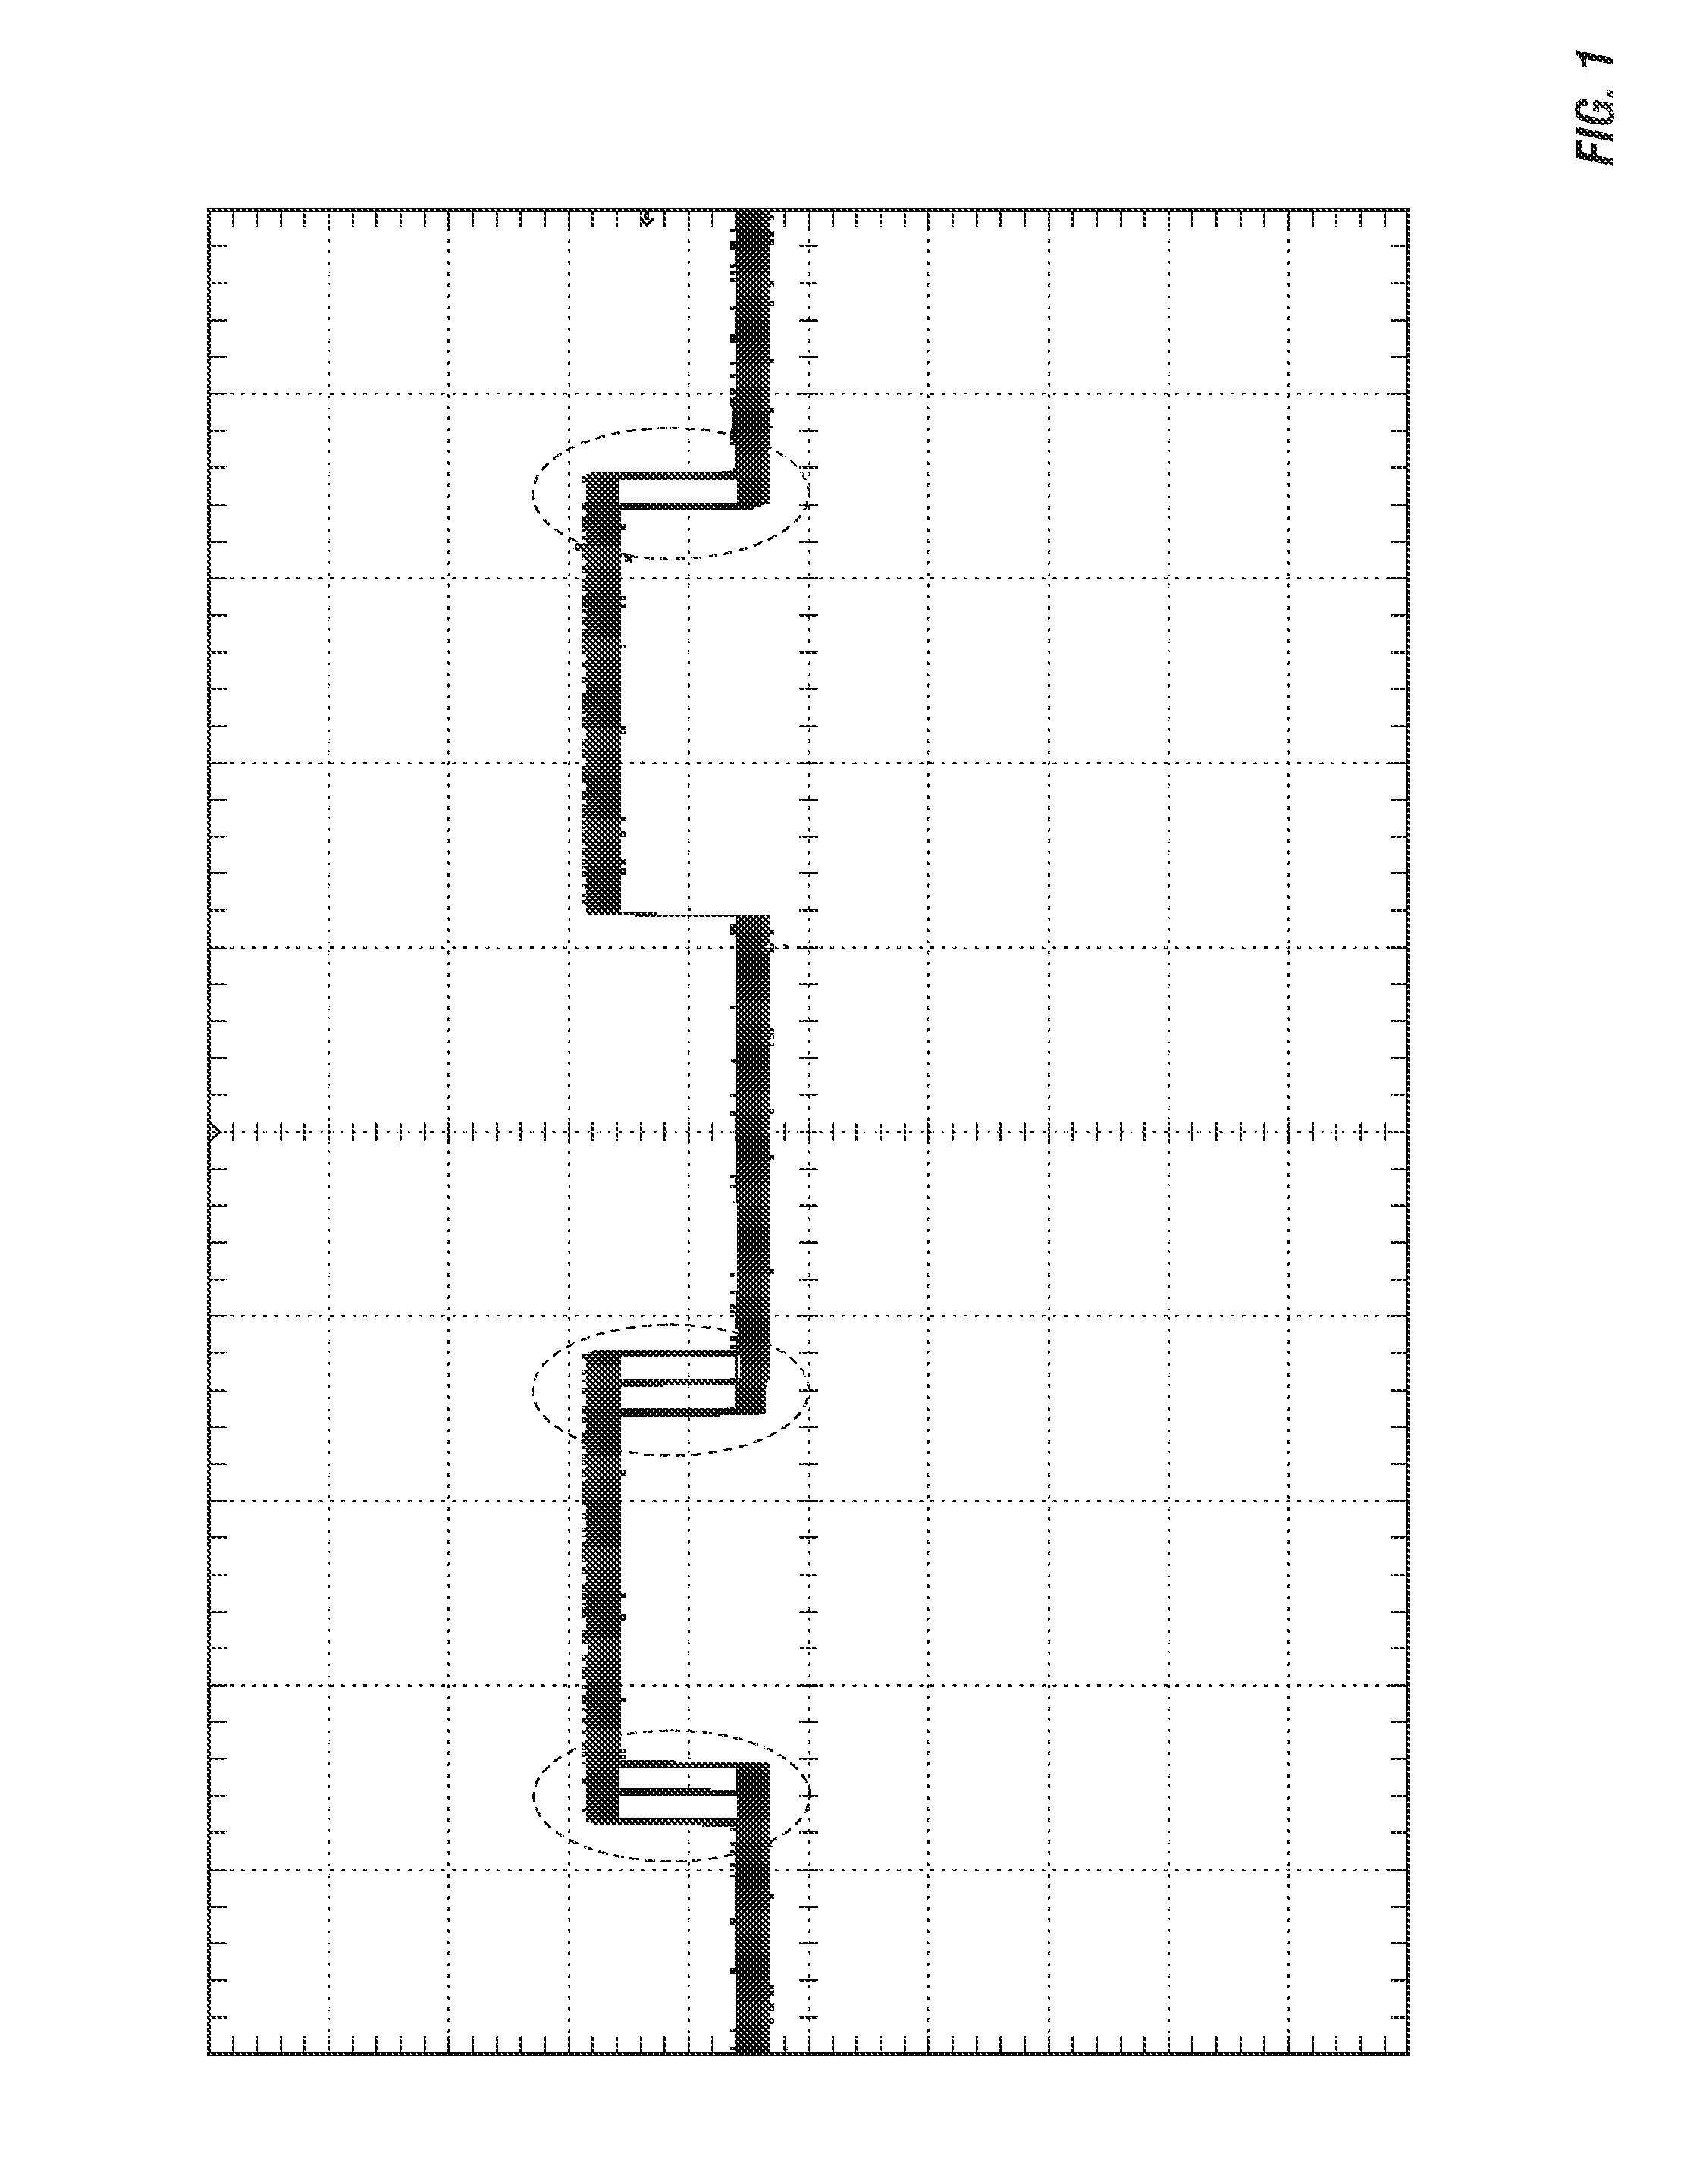 Methods, systems and apparatus for adjusting duty cycle of pulse width modulated (PWM) waveforms